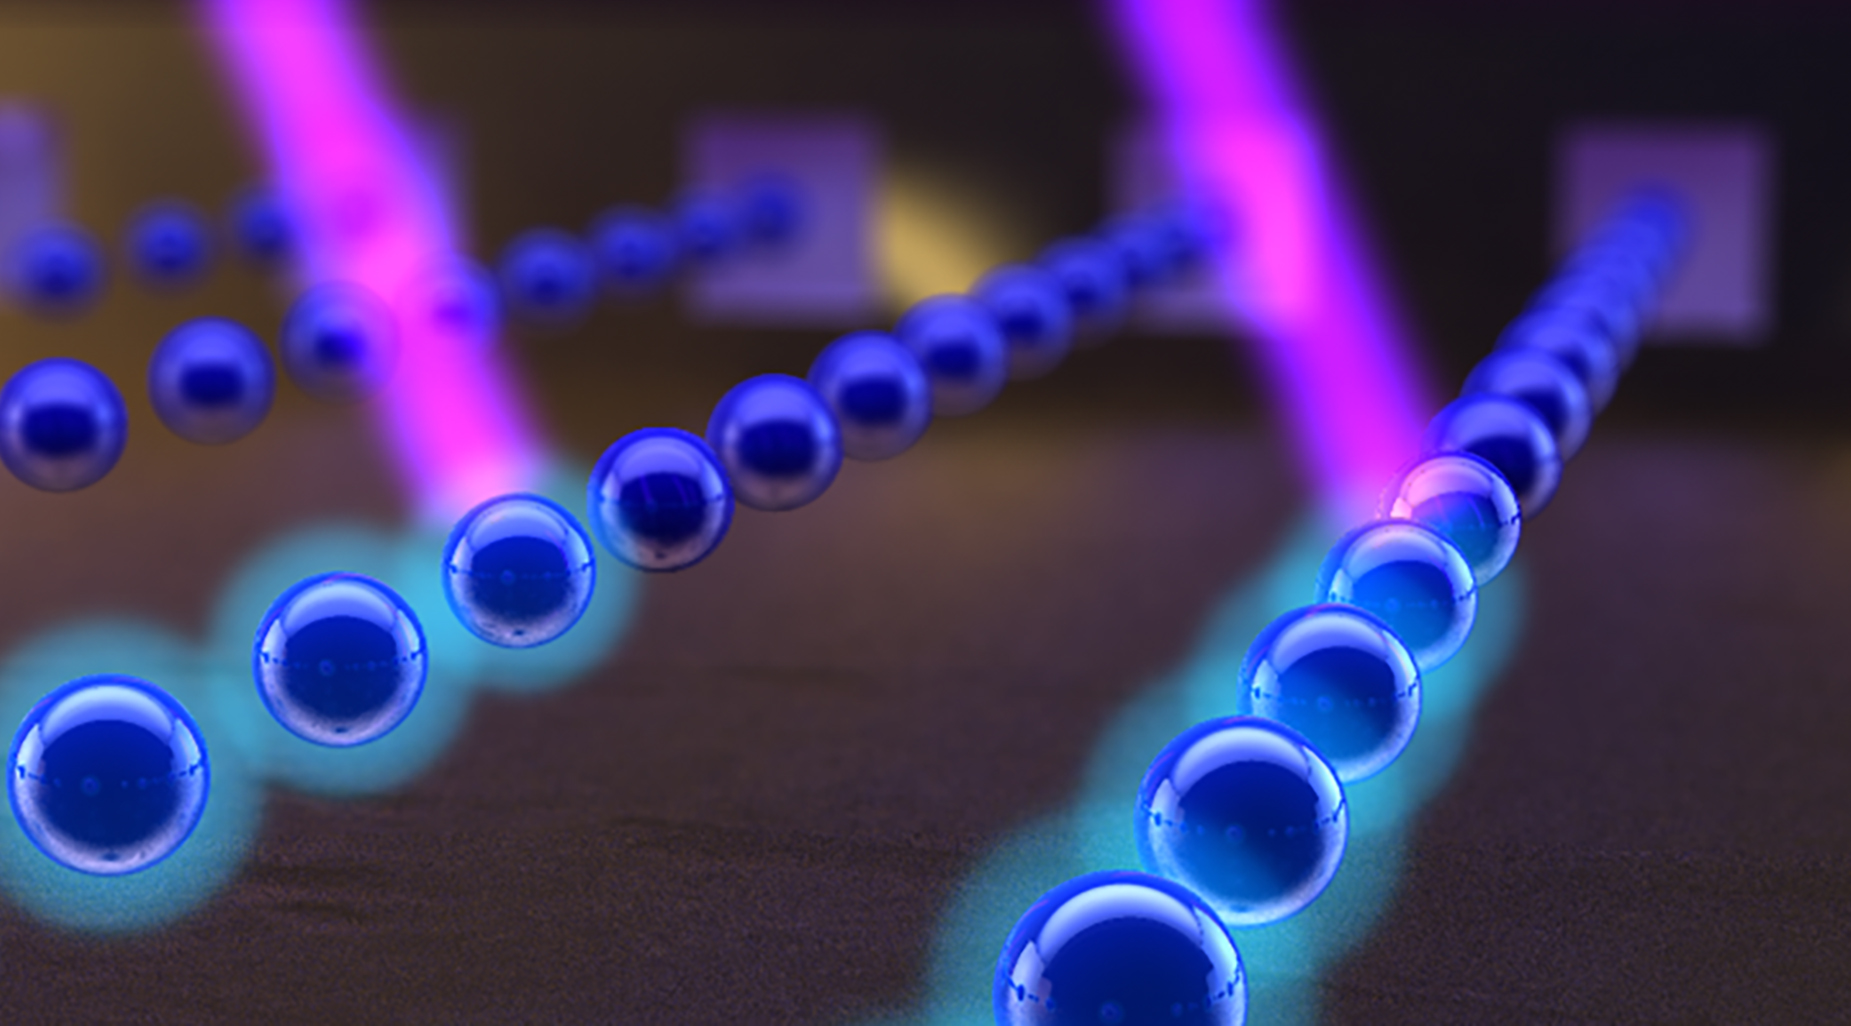 Atoms, here in blue, shoot out of parallel barrels of an atom beam collimator. Lasers, here in pink, can manipulate the exiting atoms for desired effects. Credit: Georgia Tech / Ella Maru studios work for hire